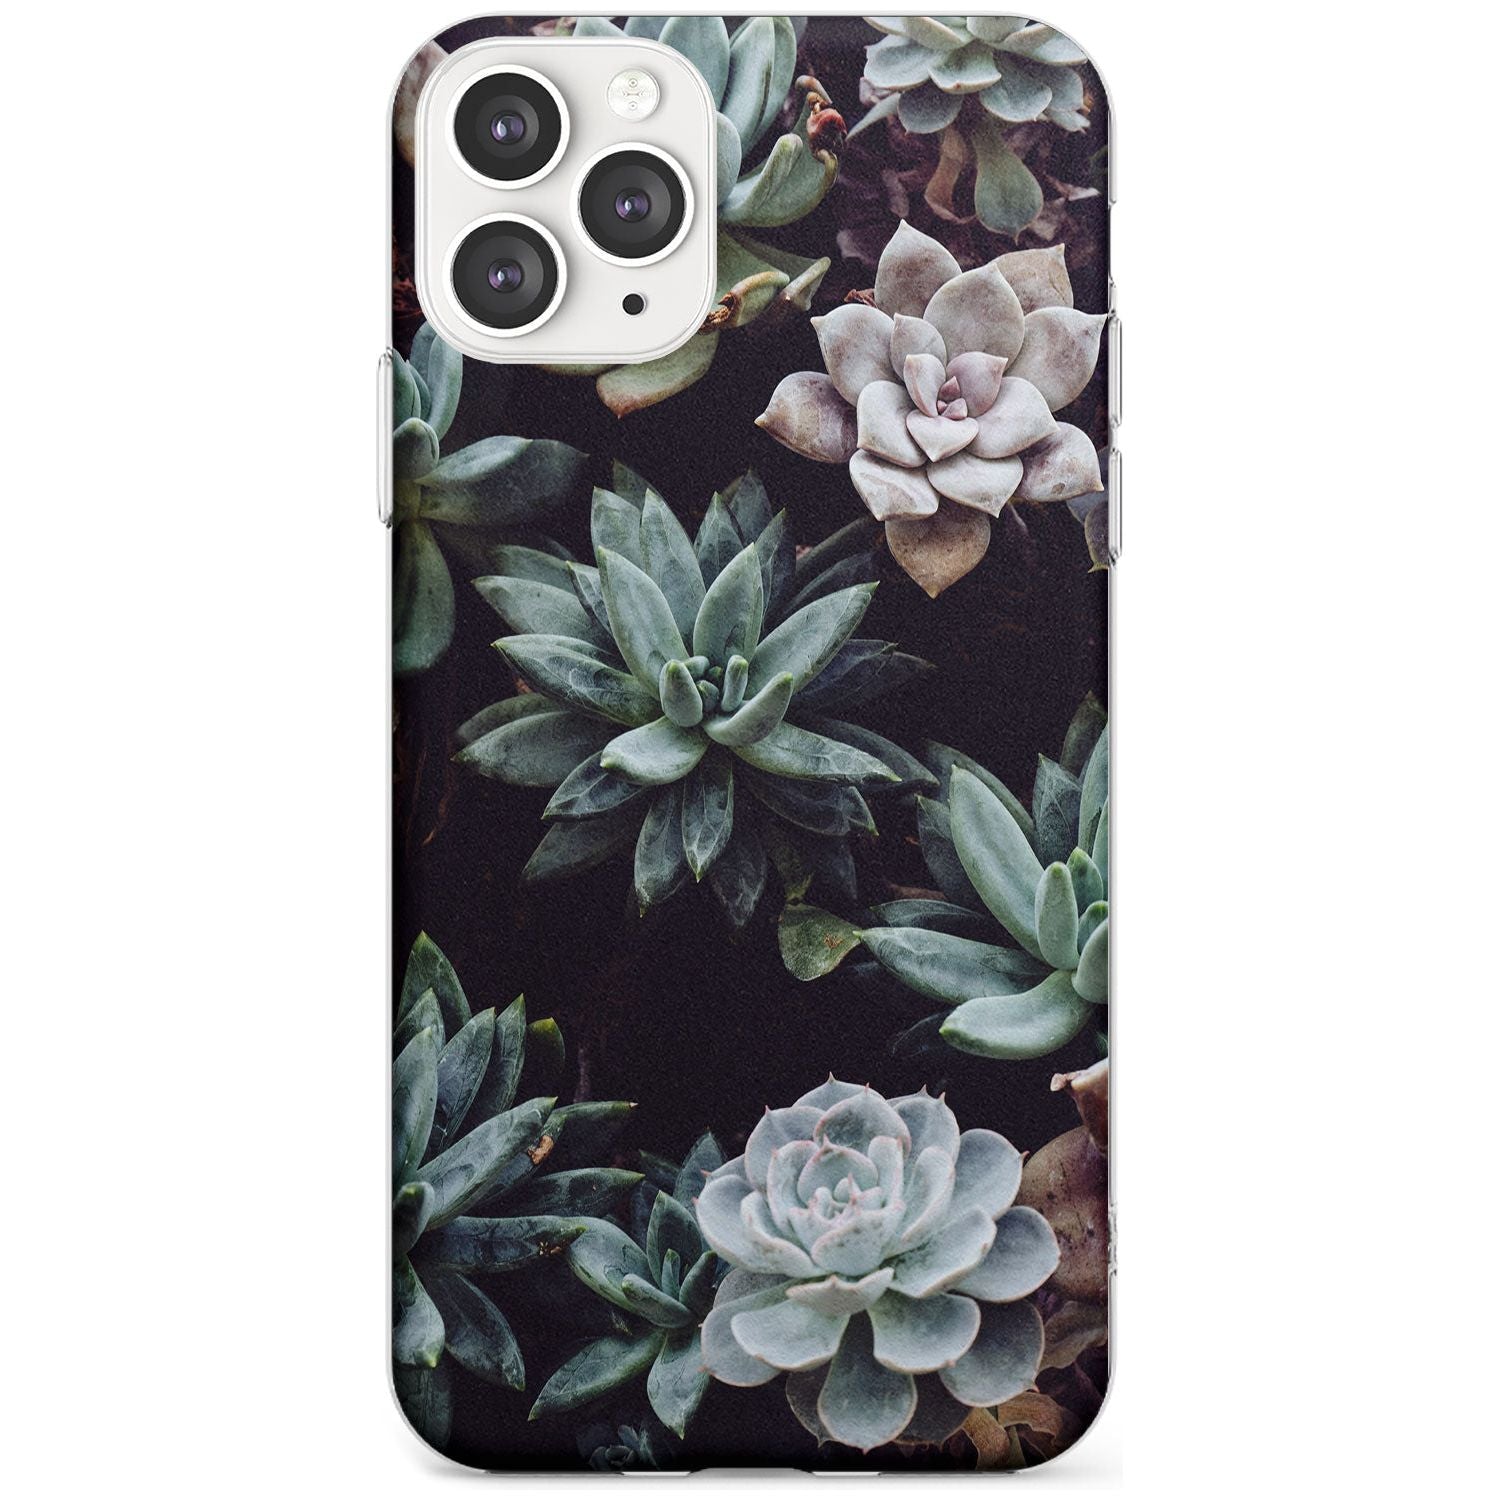 Mixed Succulents - Real Botanical Photographs Slim TPU Phone Case for iPhone 11 Pro Max